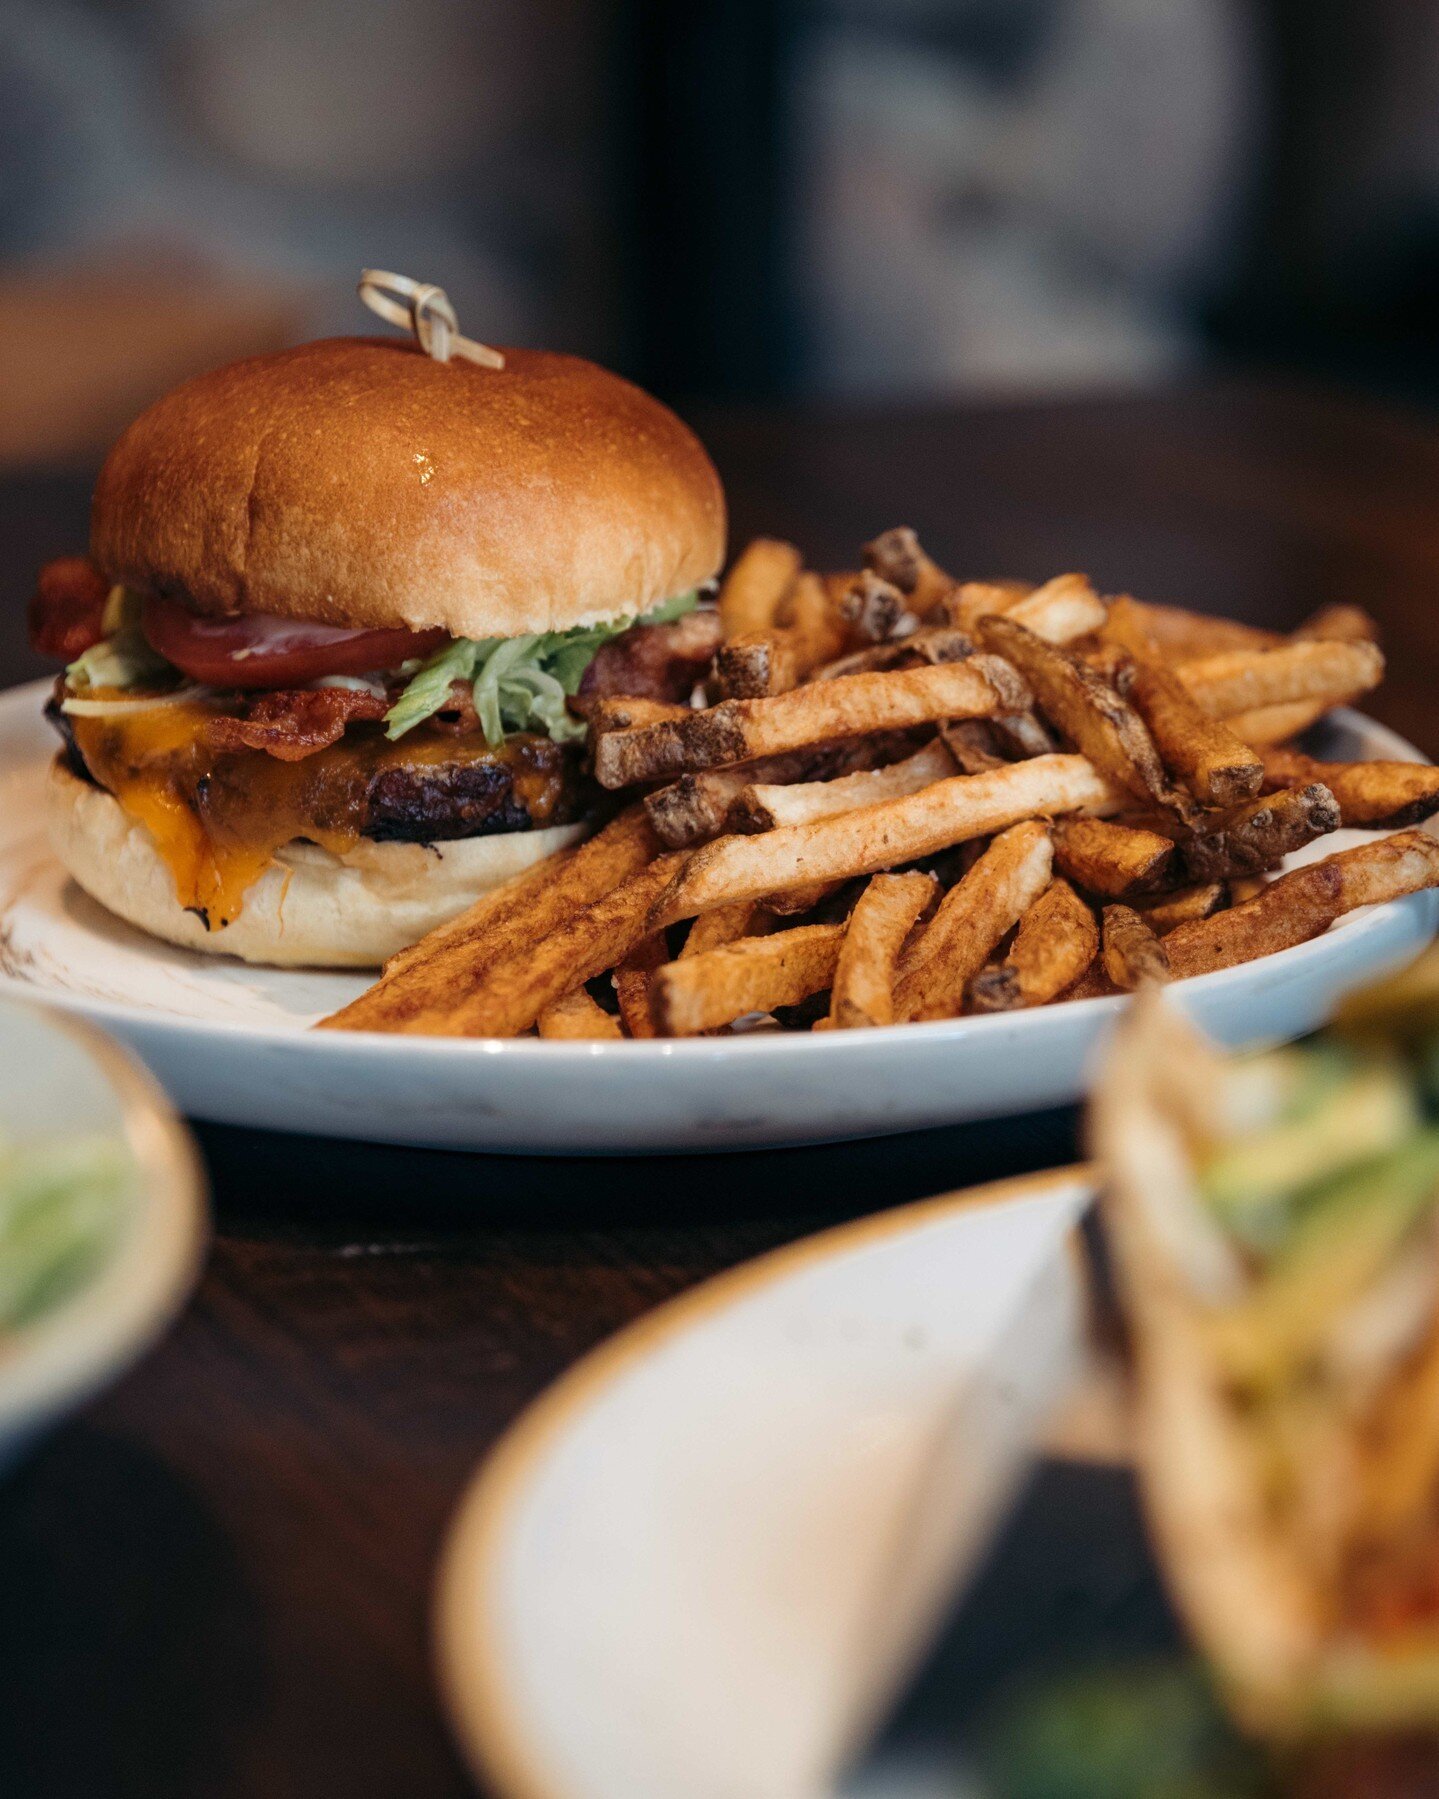 Feeling a Maple Leaf classic? The Classic Benchmark Burger - 8oz natural premium chuck, house burger sauce, pickles, aged cheddar, double smoked bacon, lettuce, tomato. 🤤

#banff #mybanff #themapleleaf #mapleleaf